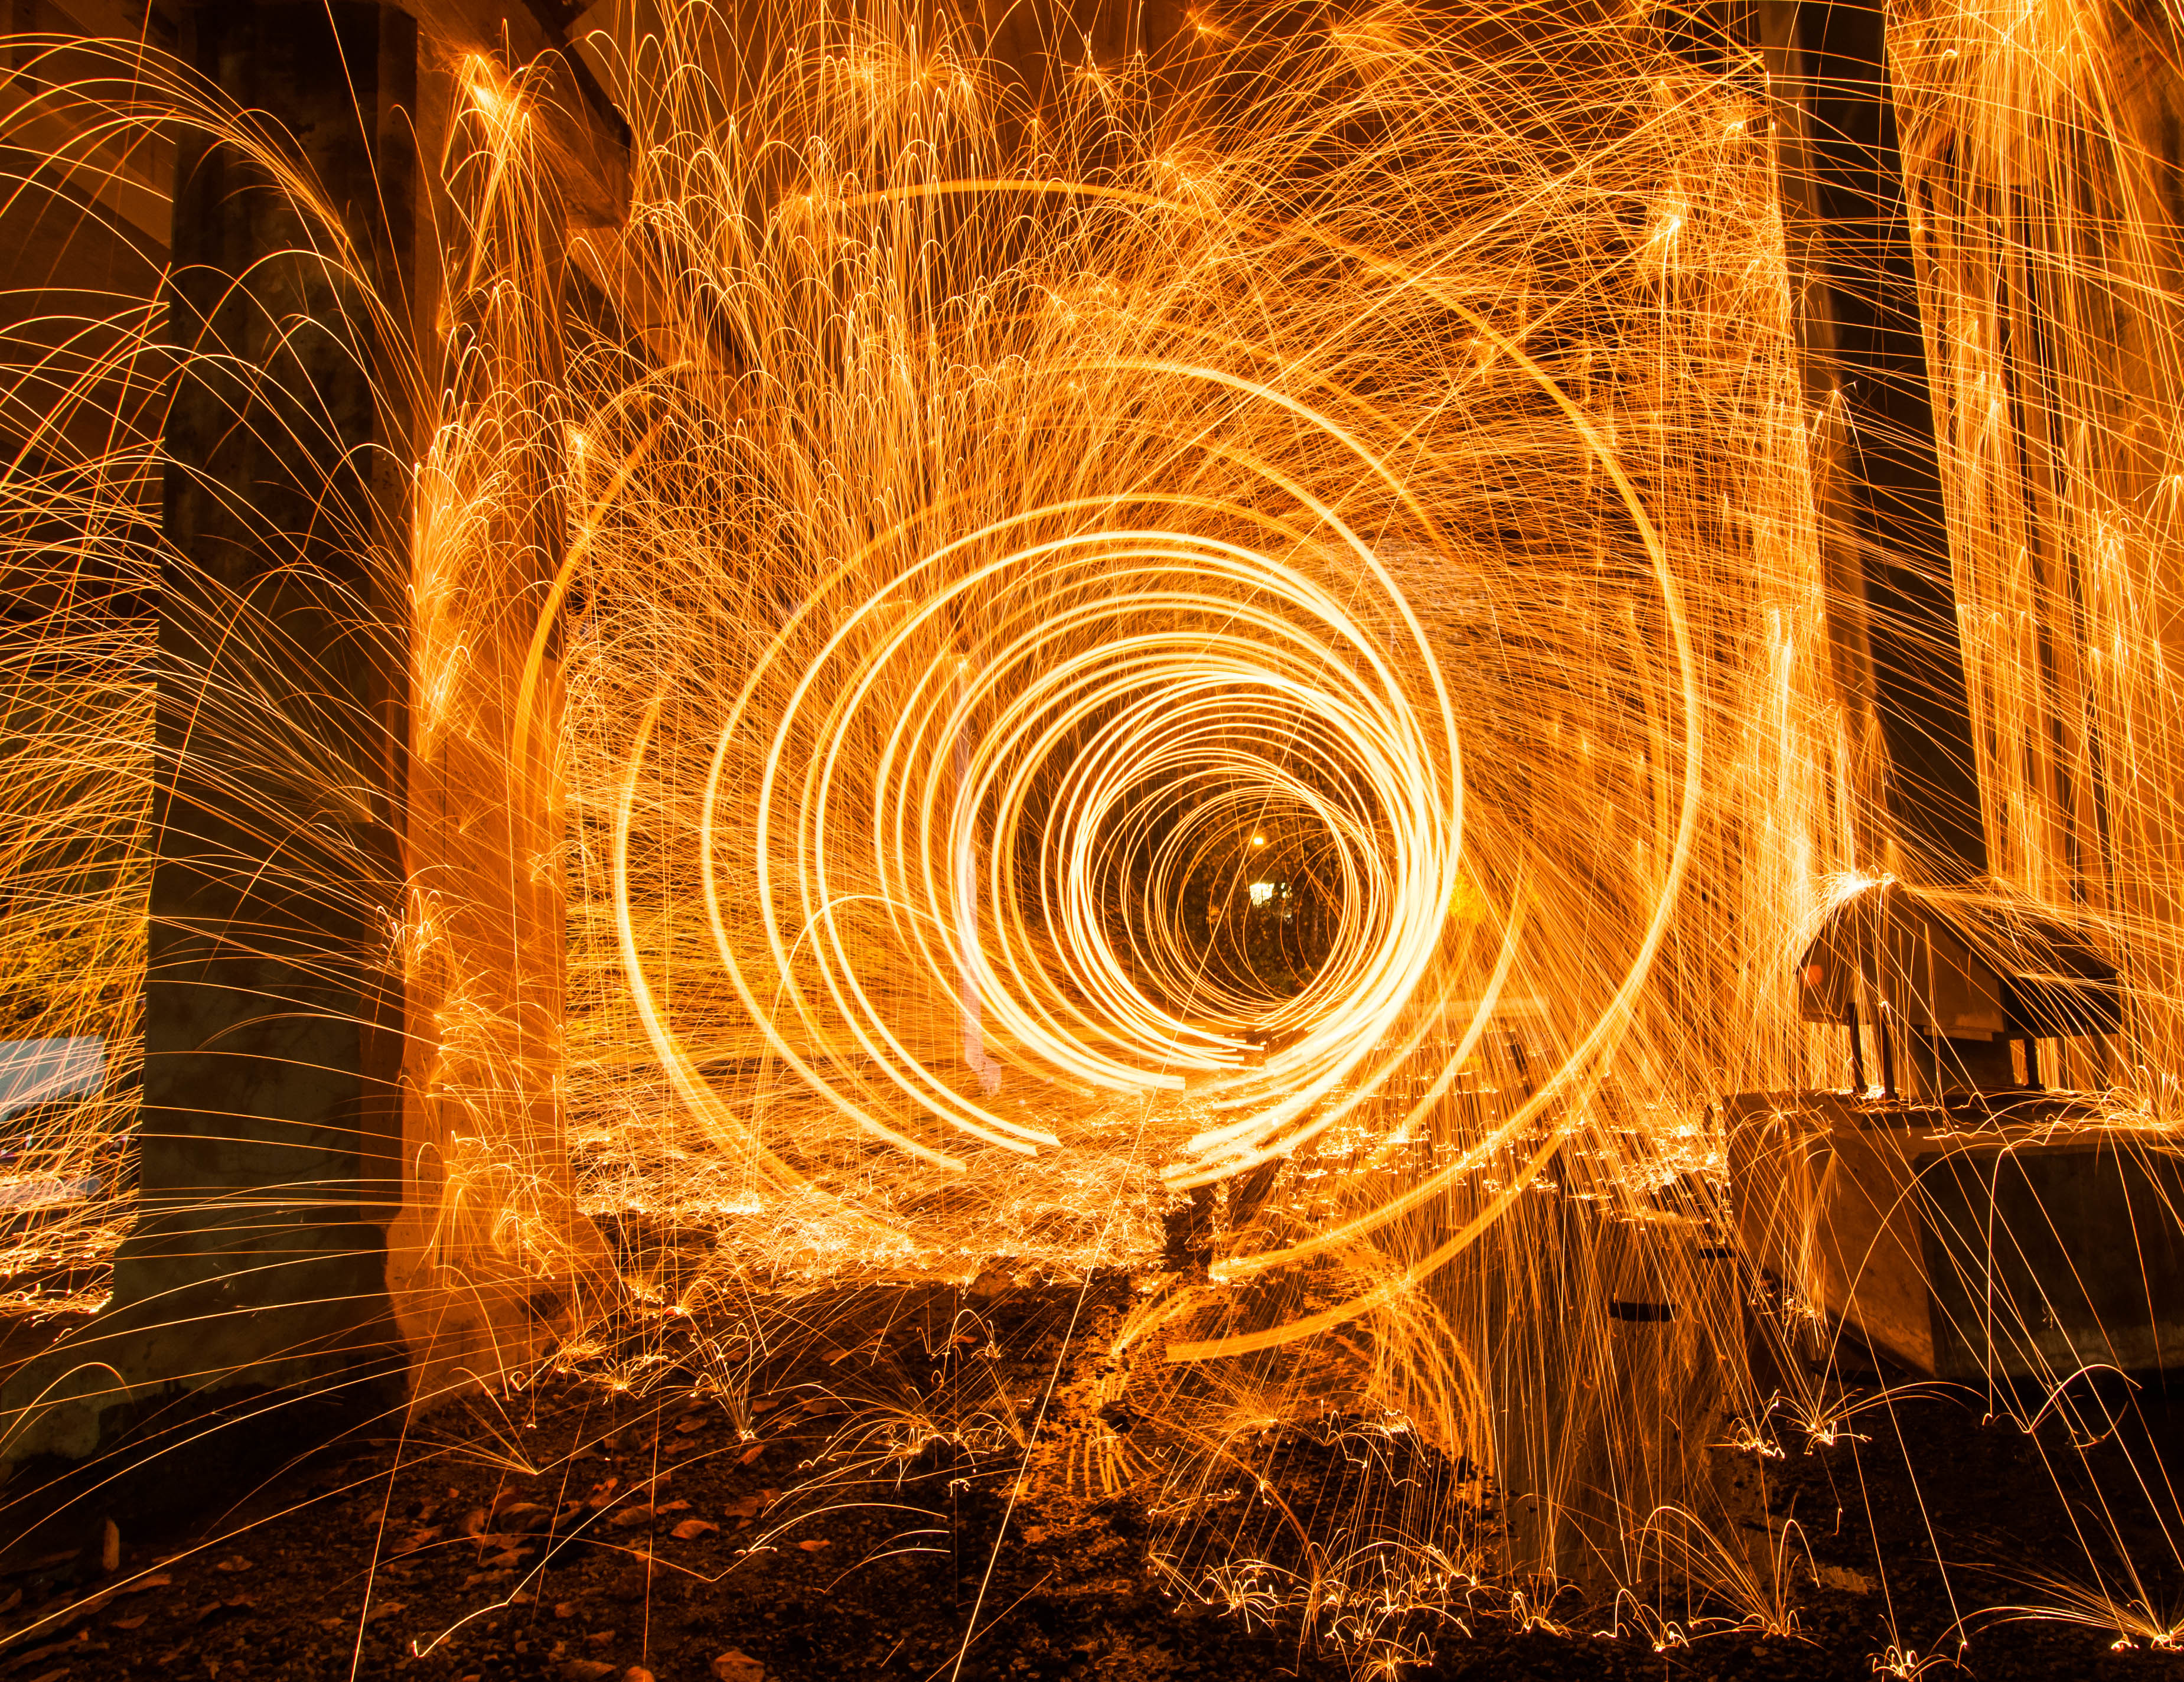 light, long exposure, abstract, circles, shine, sparks, freezelight High Definition image